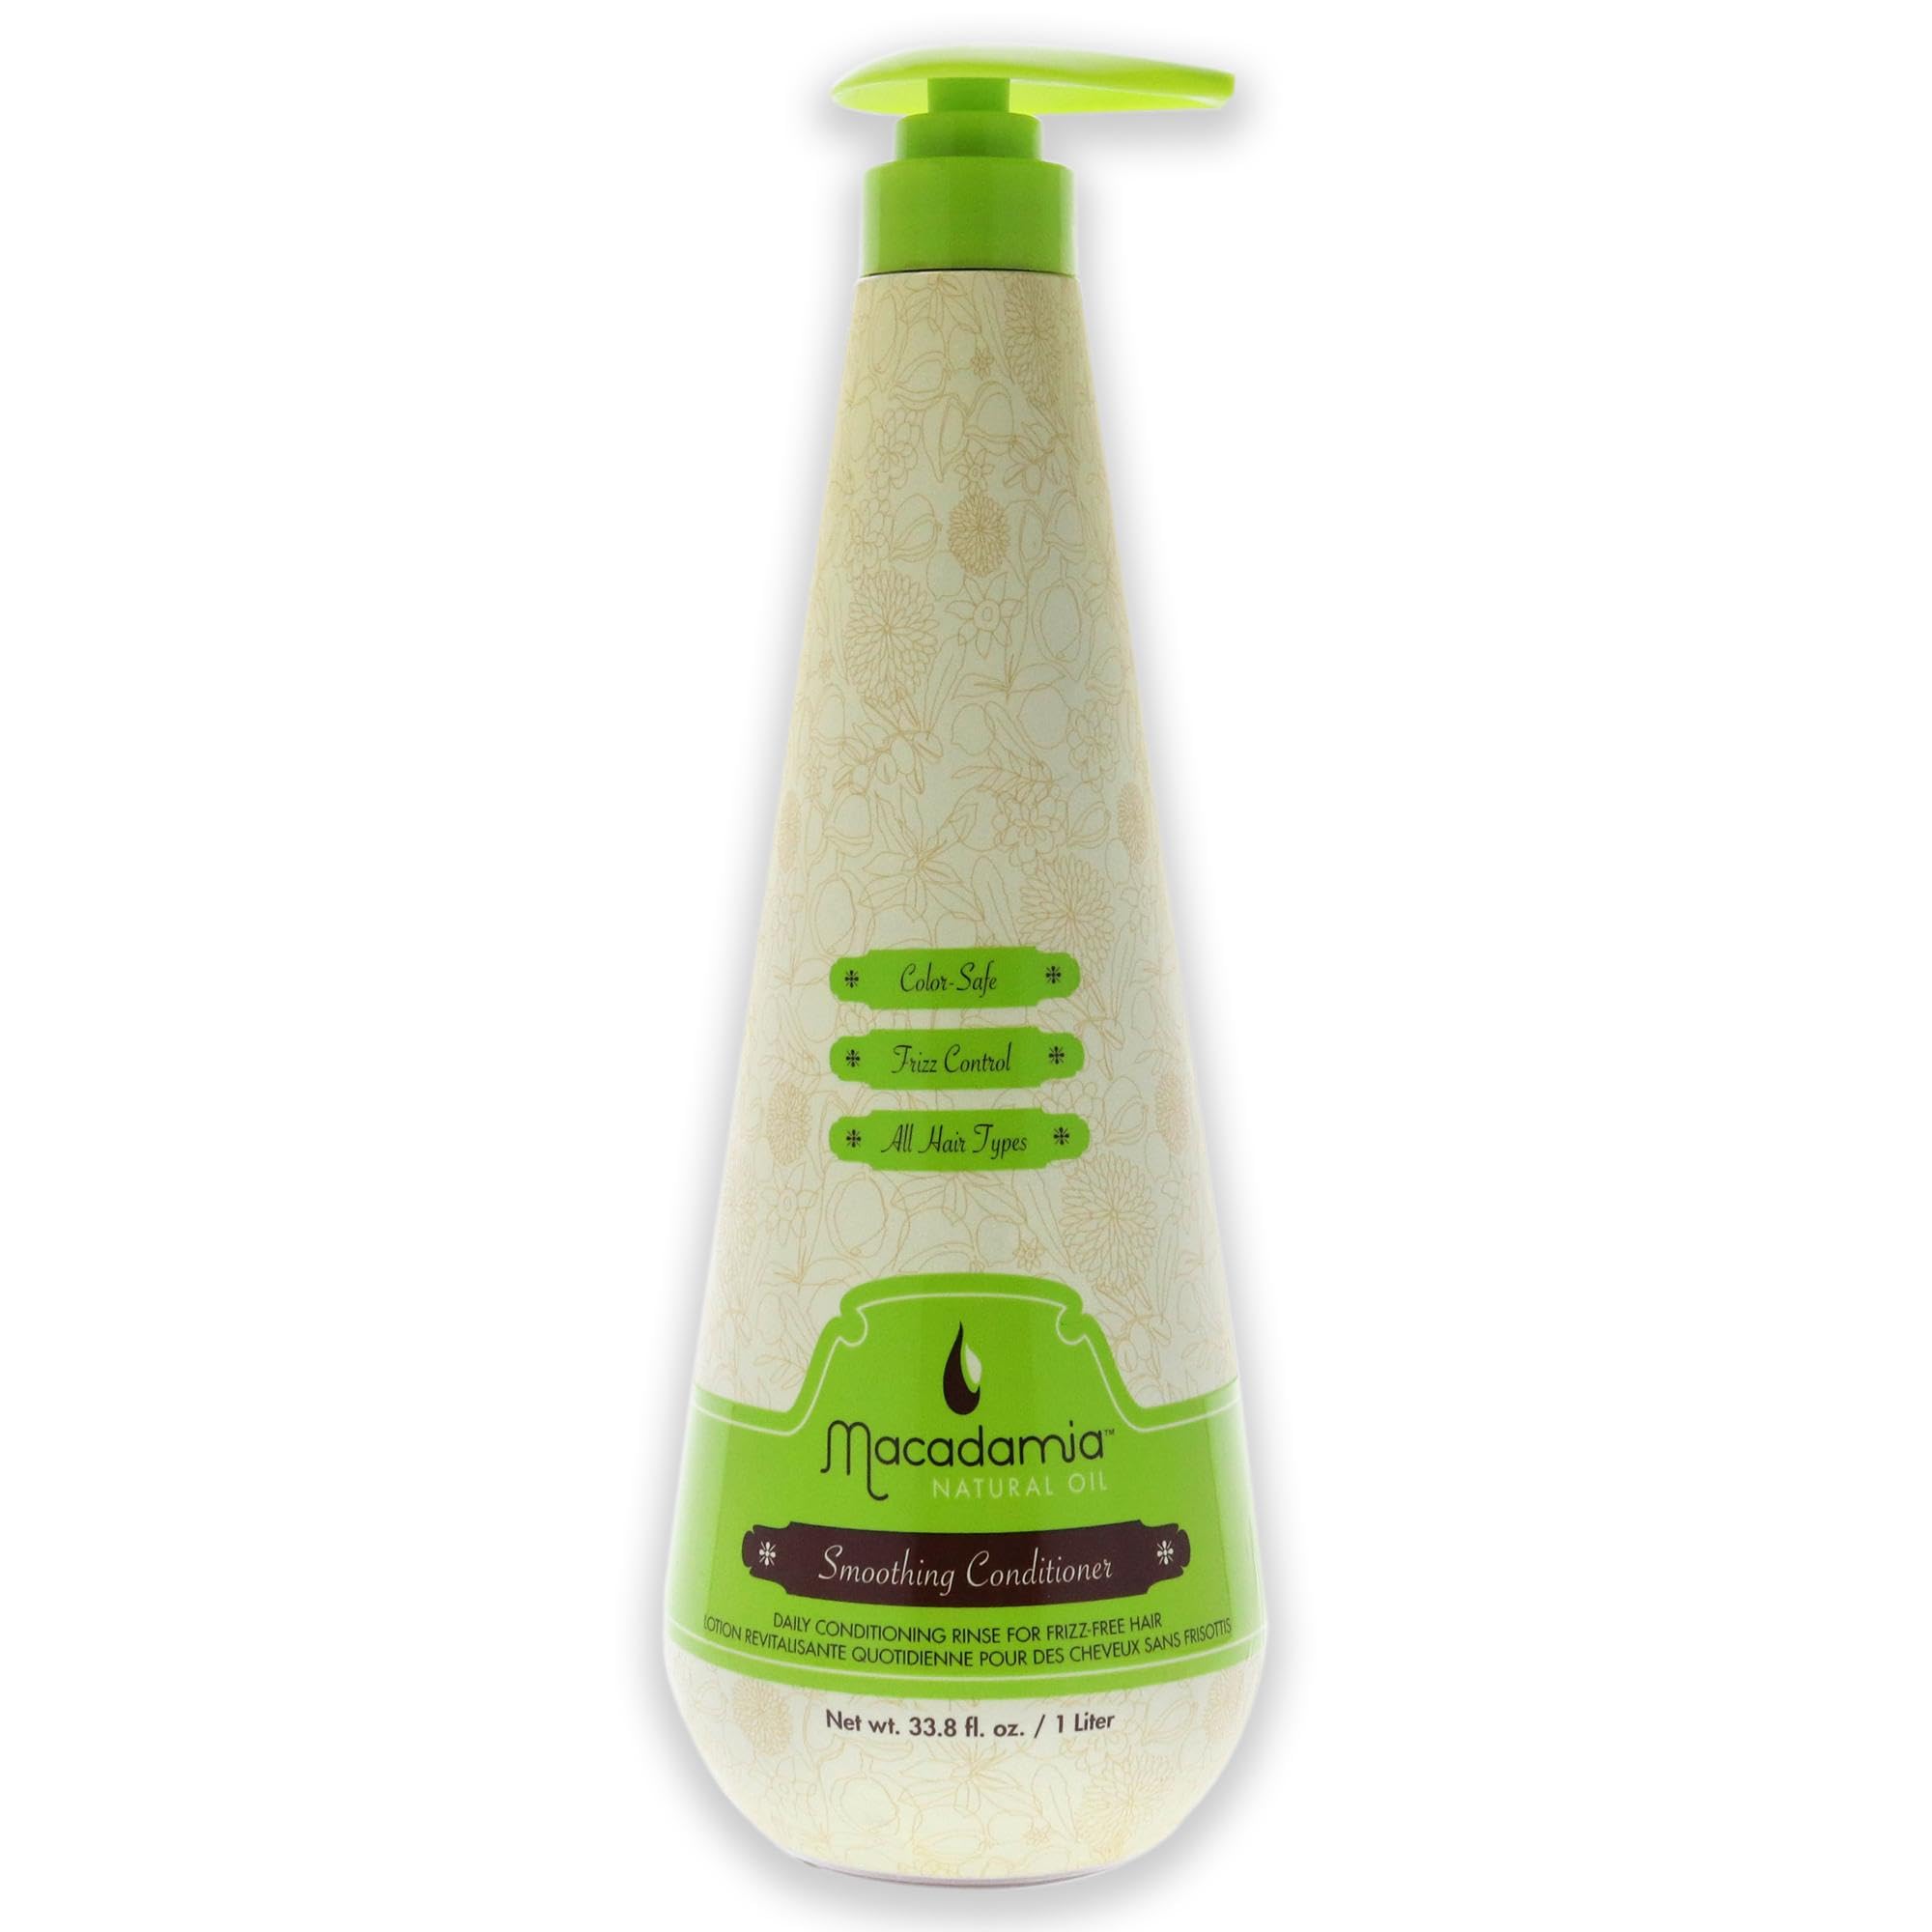 Macadamia Natural Oil Smoothing Conditioner, 1000 ml,Leder